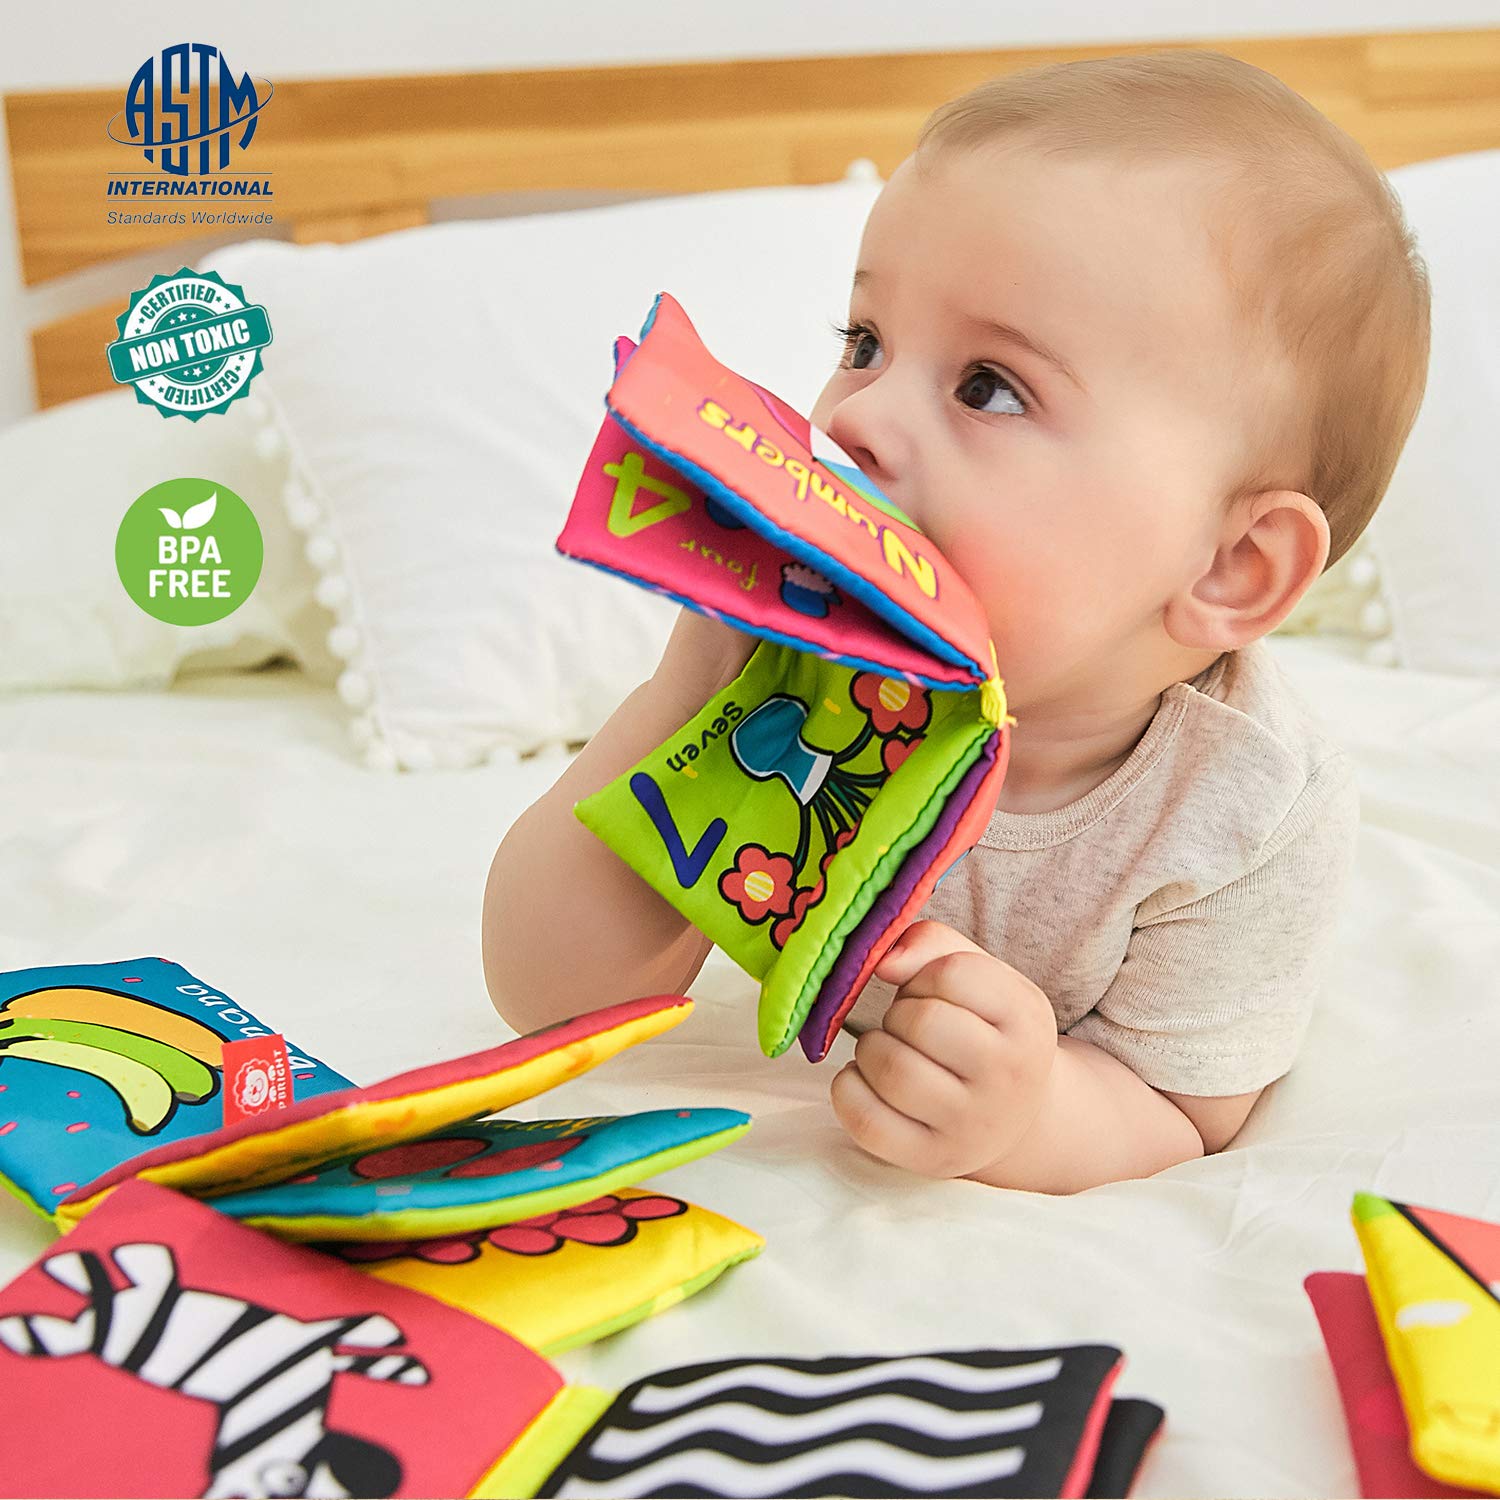 TOP BRIGHT Soft Cloth Books for Babies First Year, Baby Toys 6 to 12 Months Girls and Boys, Crinkly Cloth Book Bath Toys(Pack of 6)